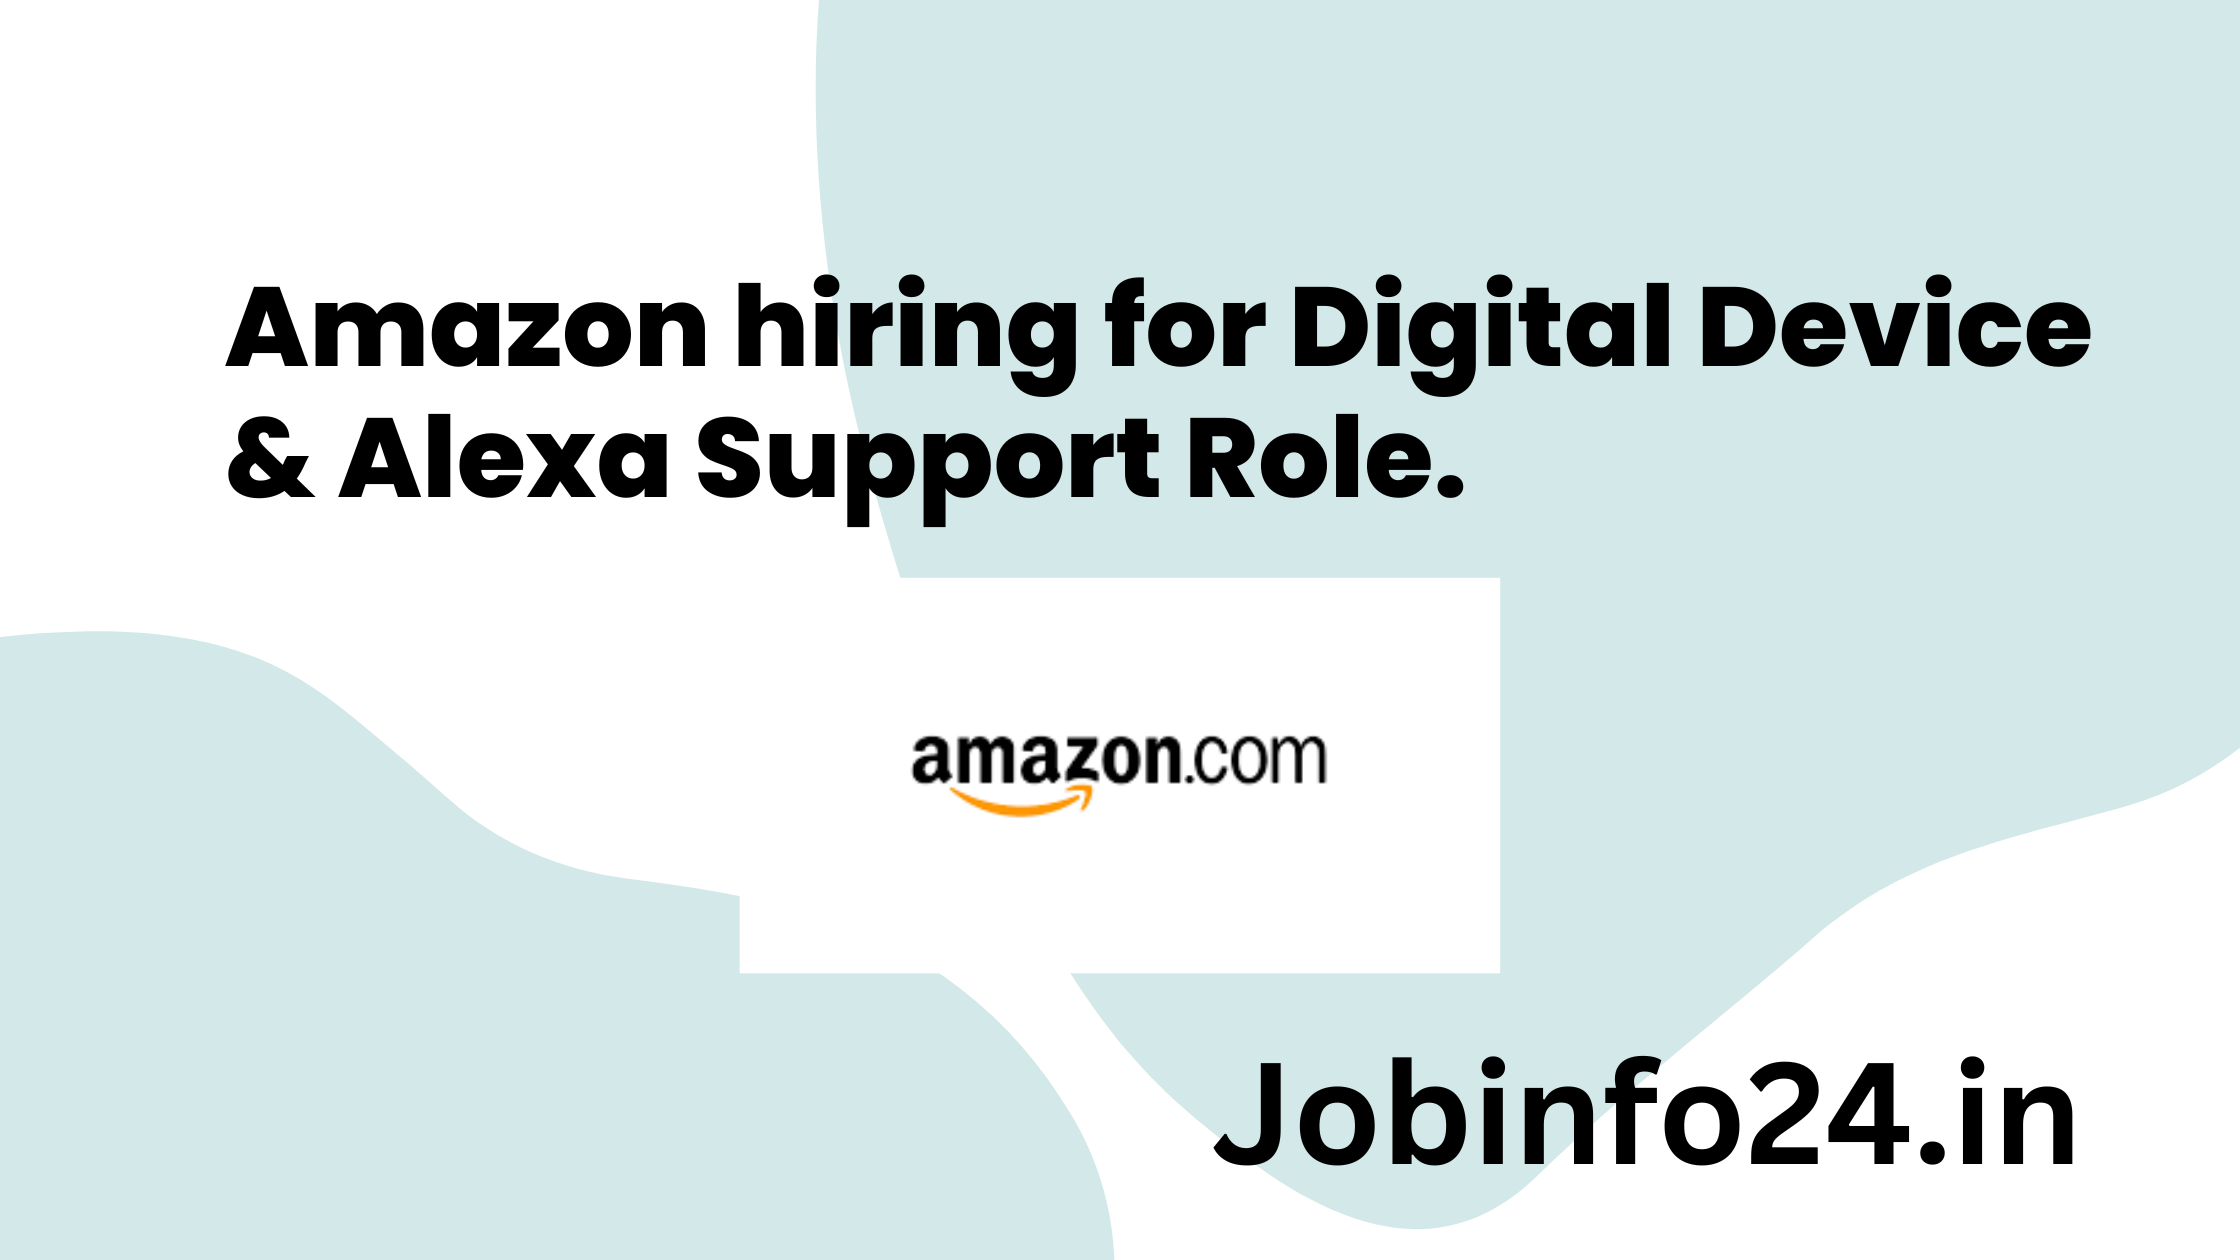 Amazon hiring for Digital Device & Alexa Support Role.